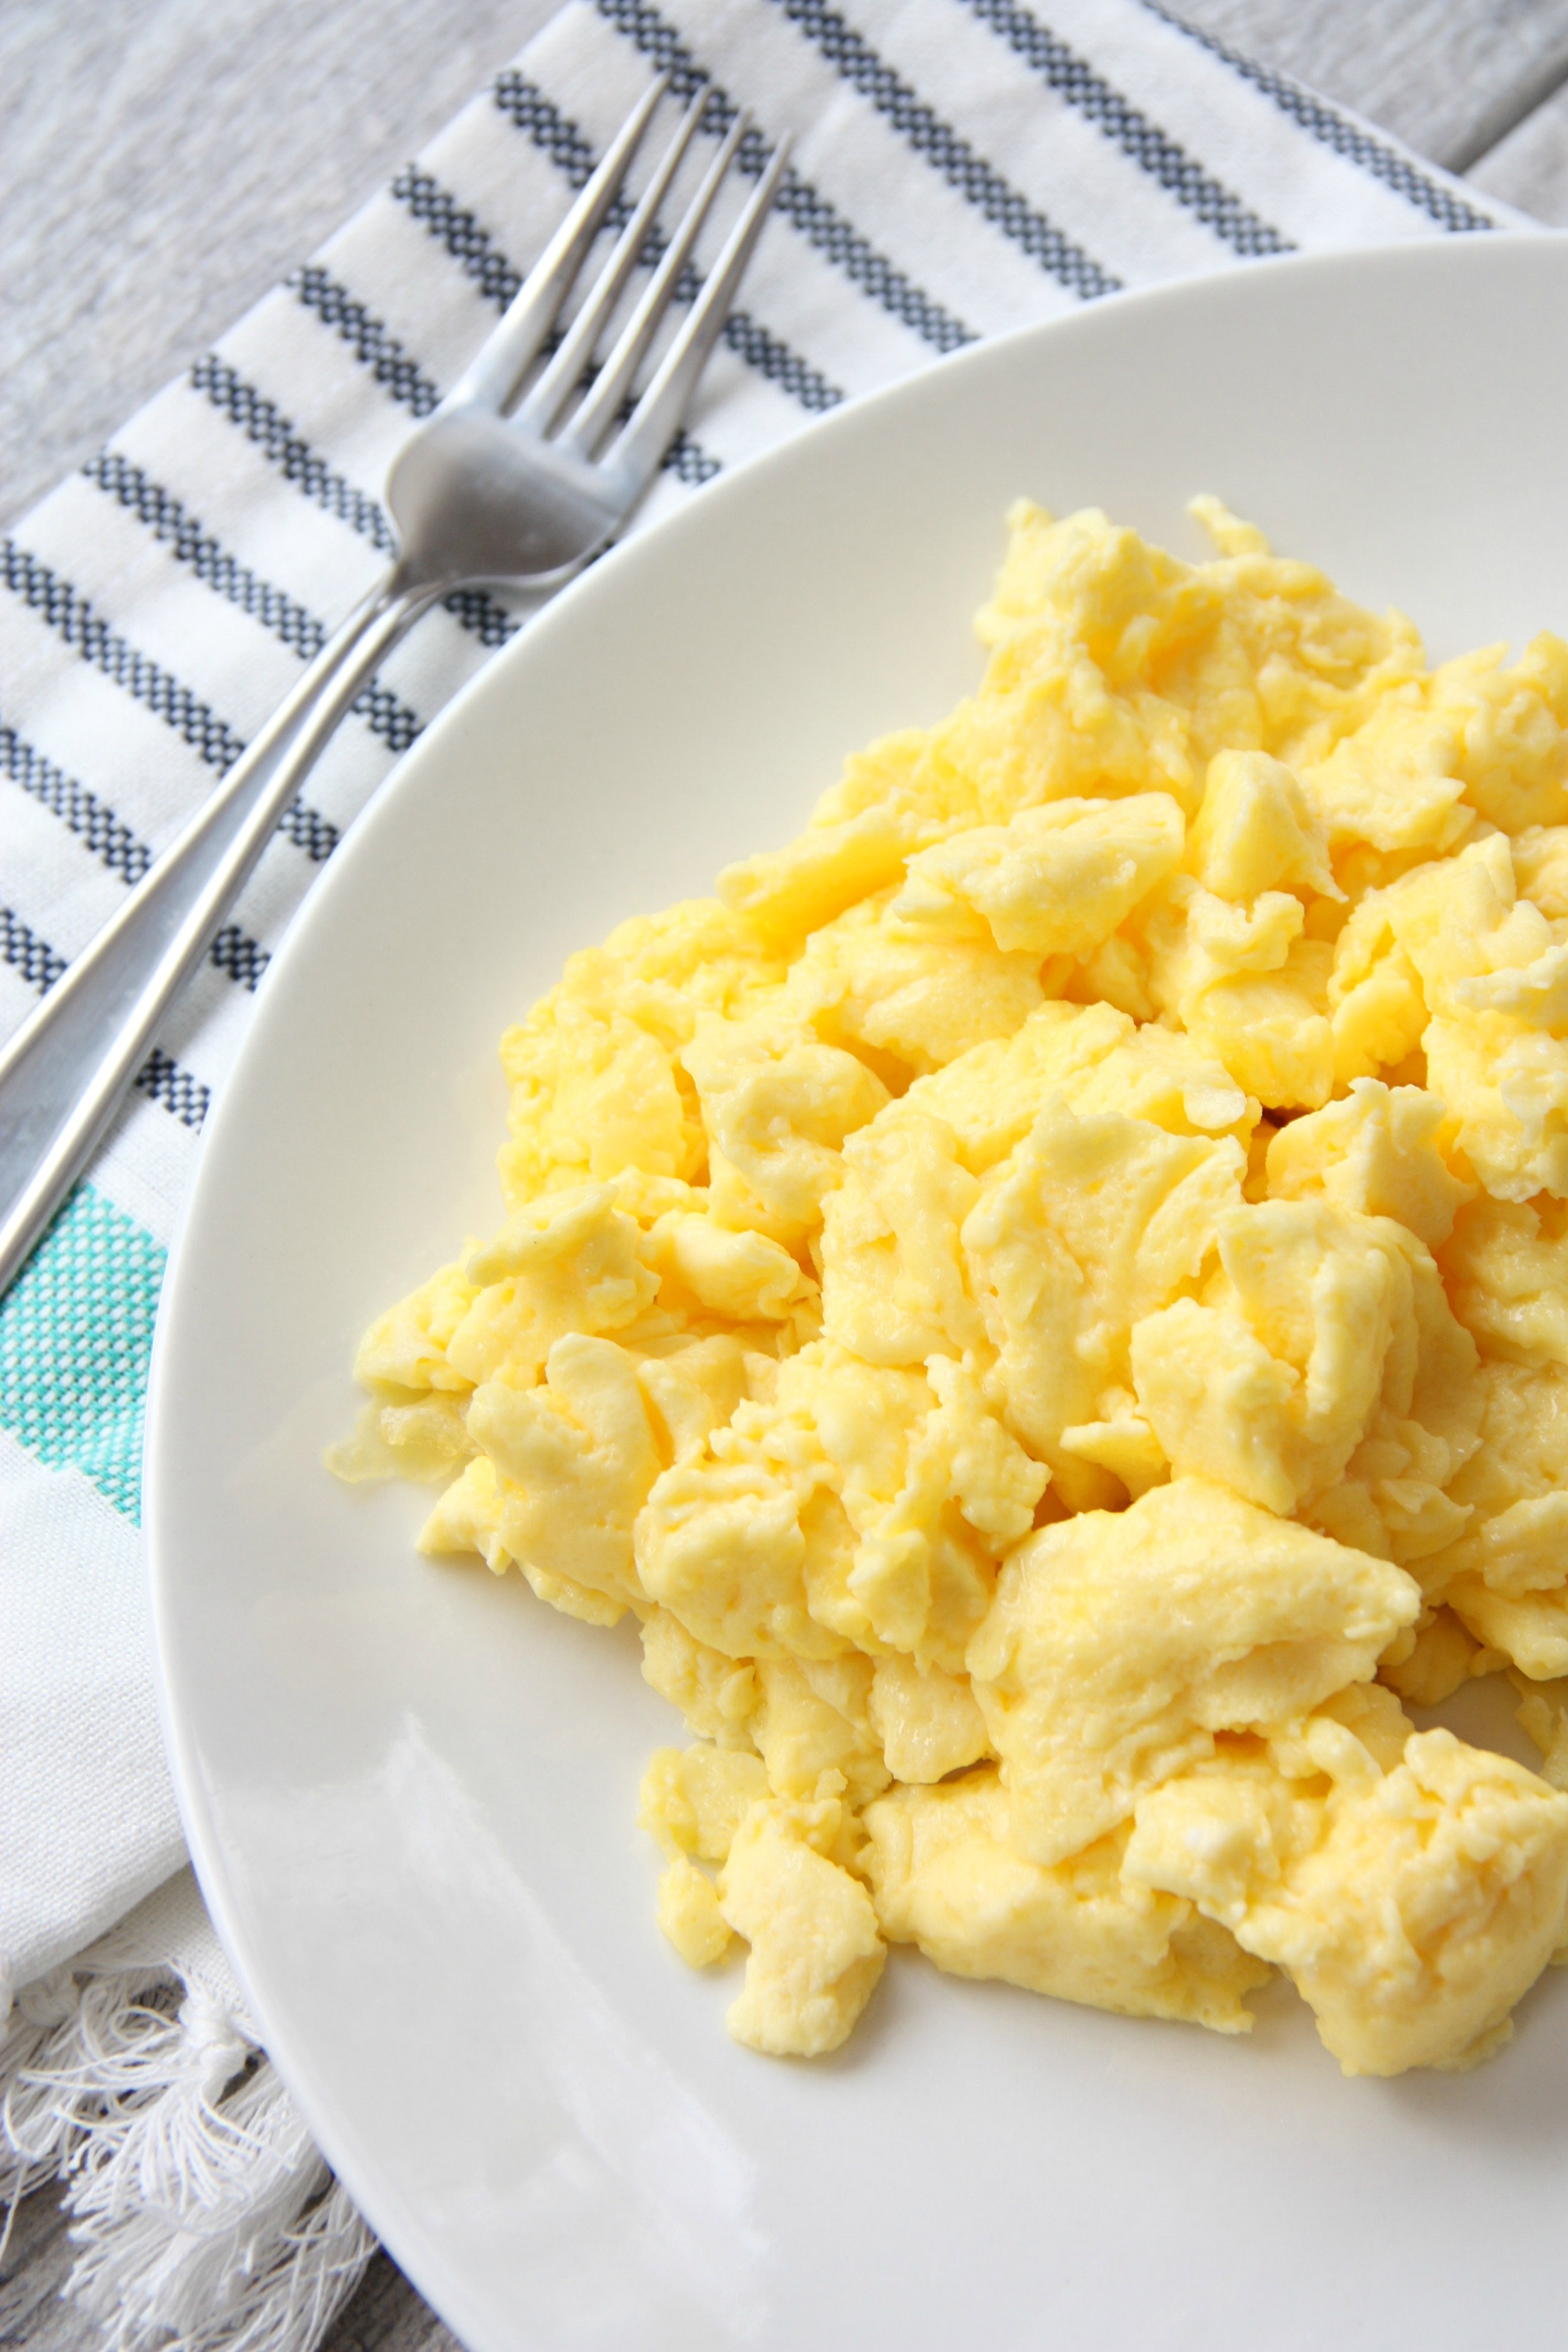 How to make perfect, fluffy scrambled eggs - My Mommy Style